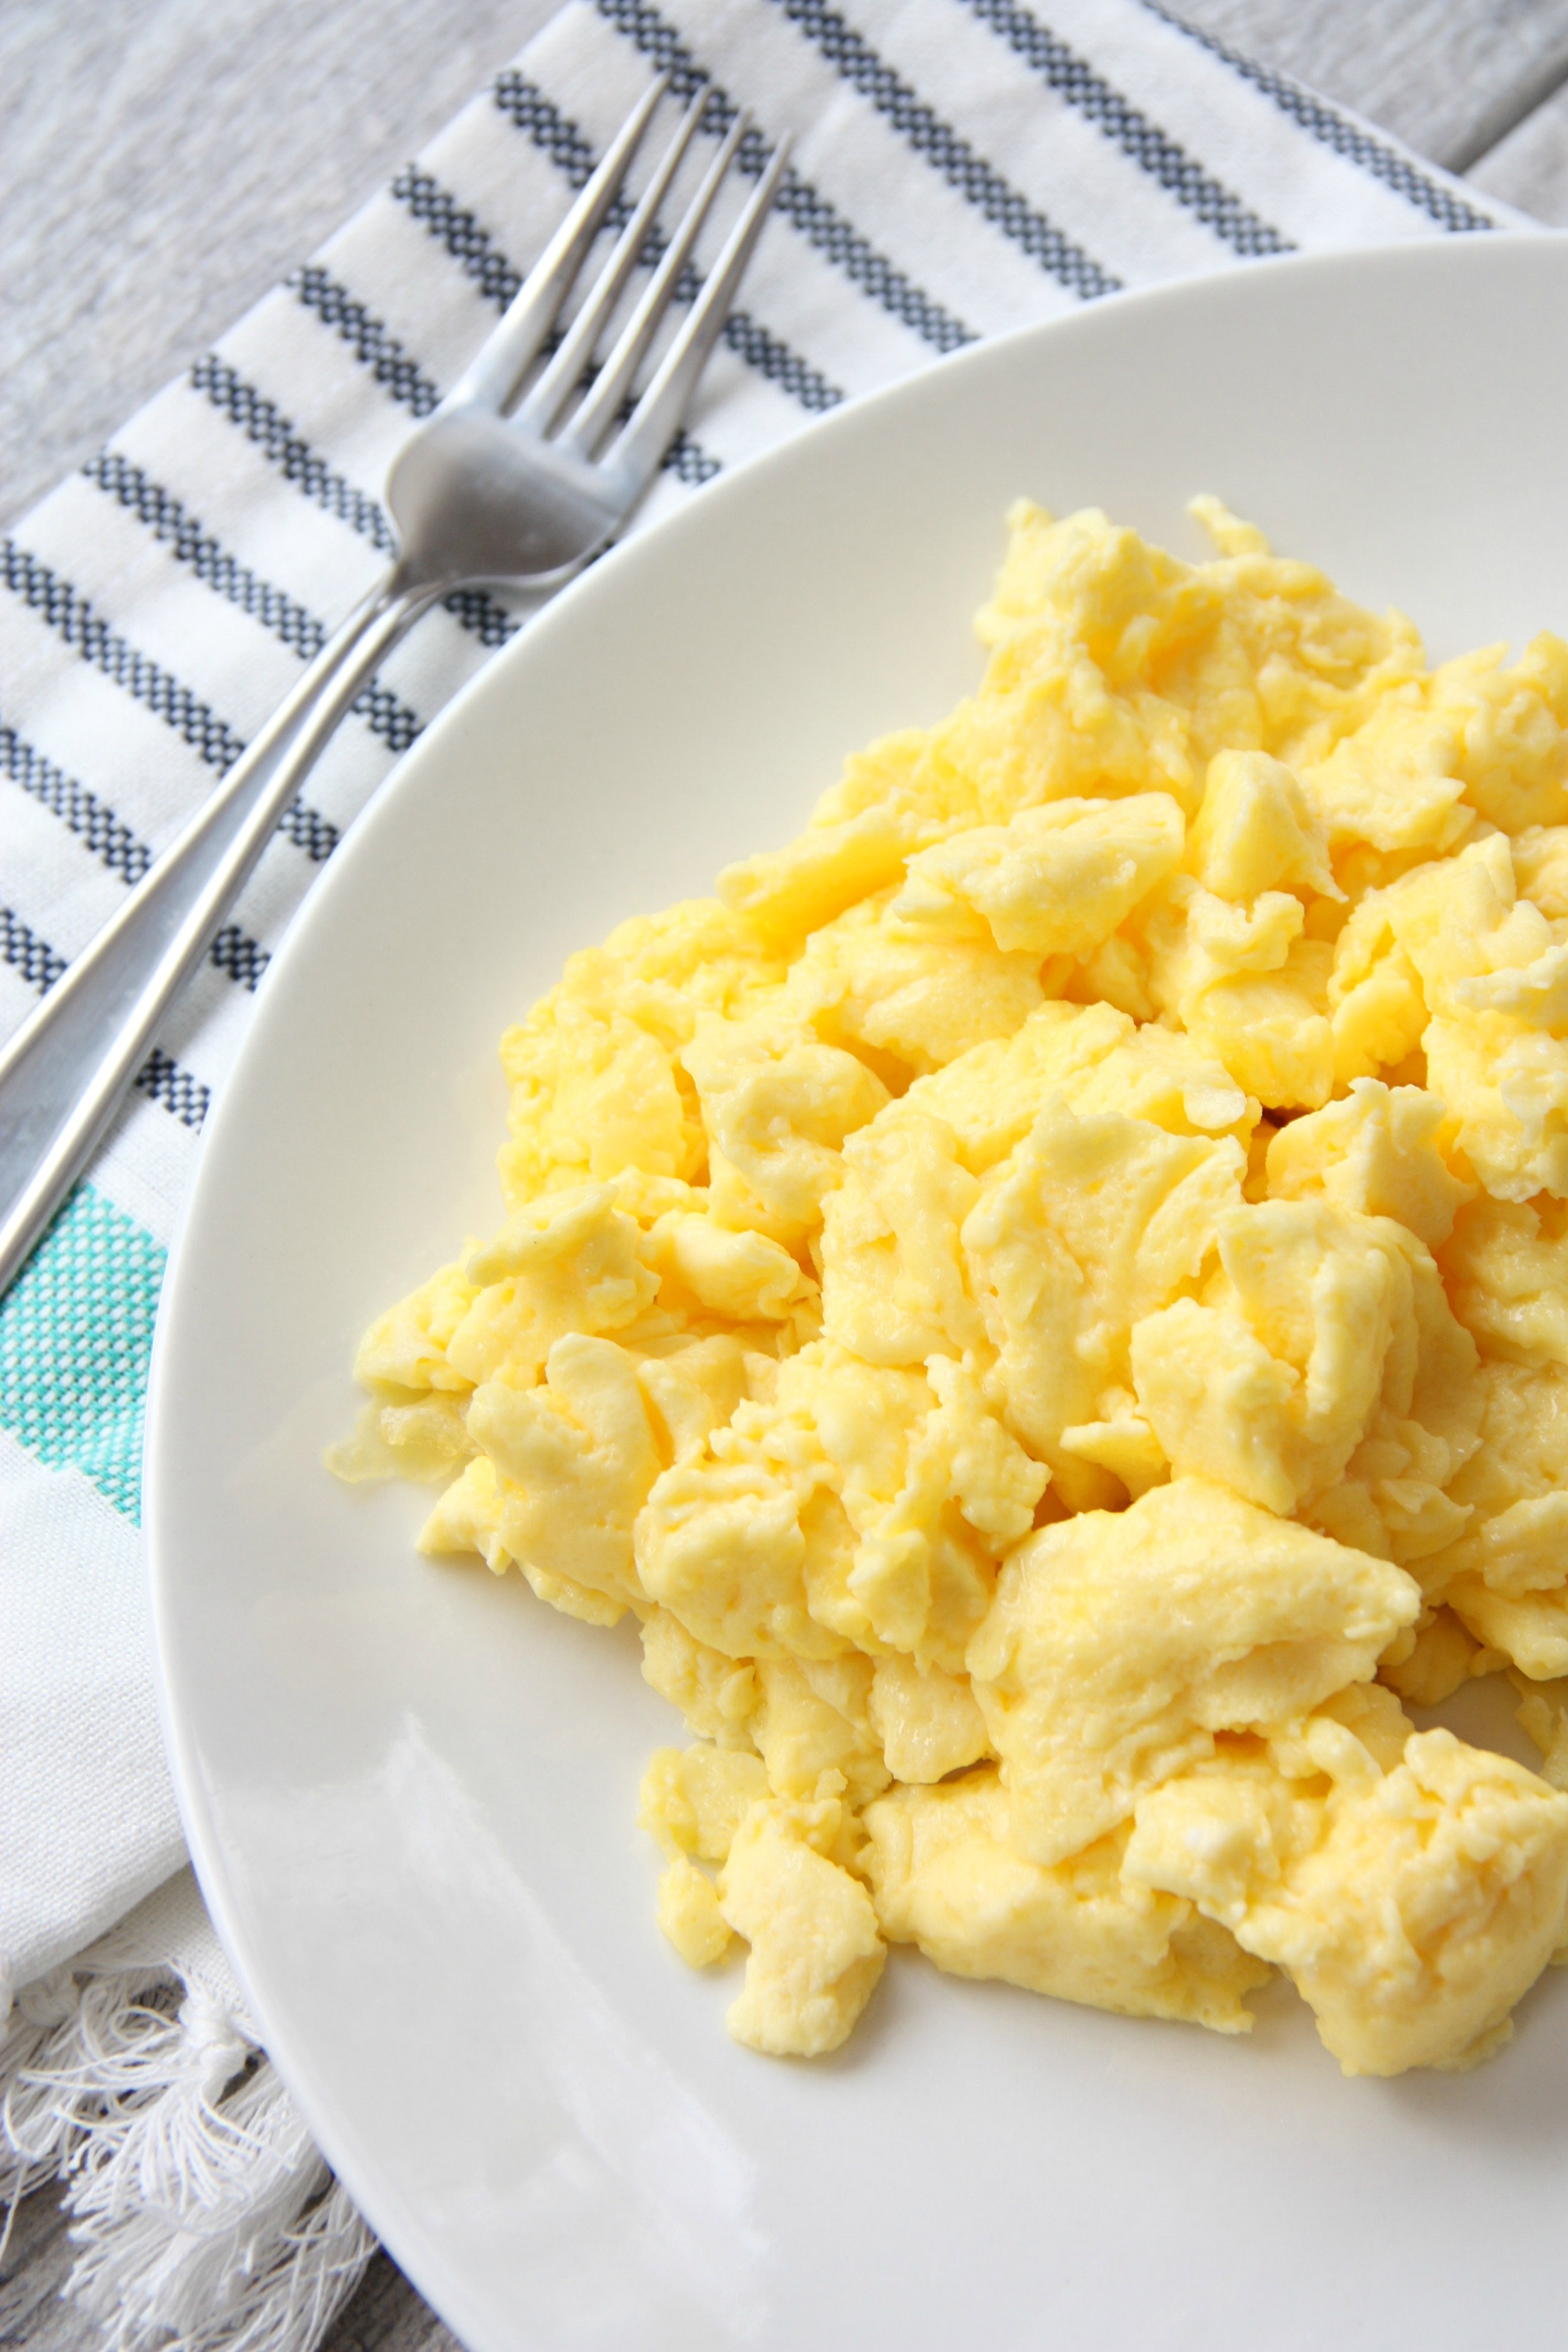 How to make perfect, fluffy scrambled eggs - My Mommy Style